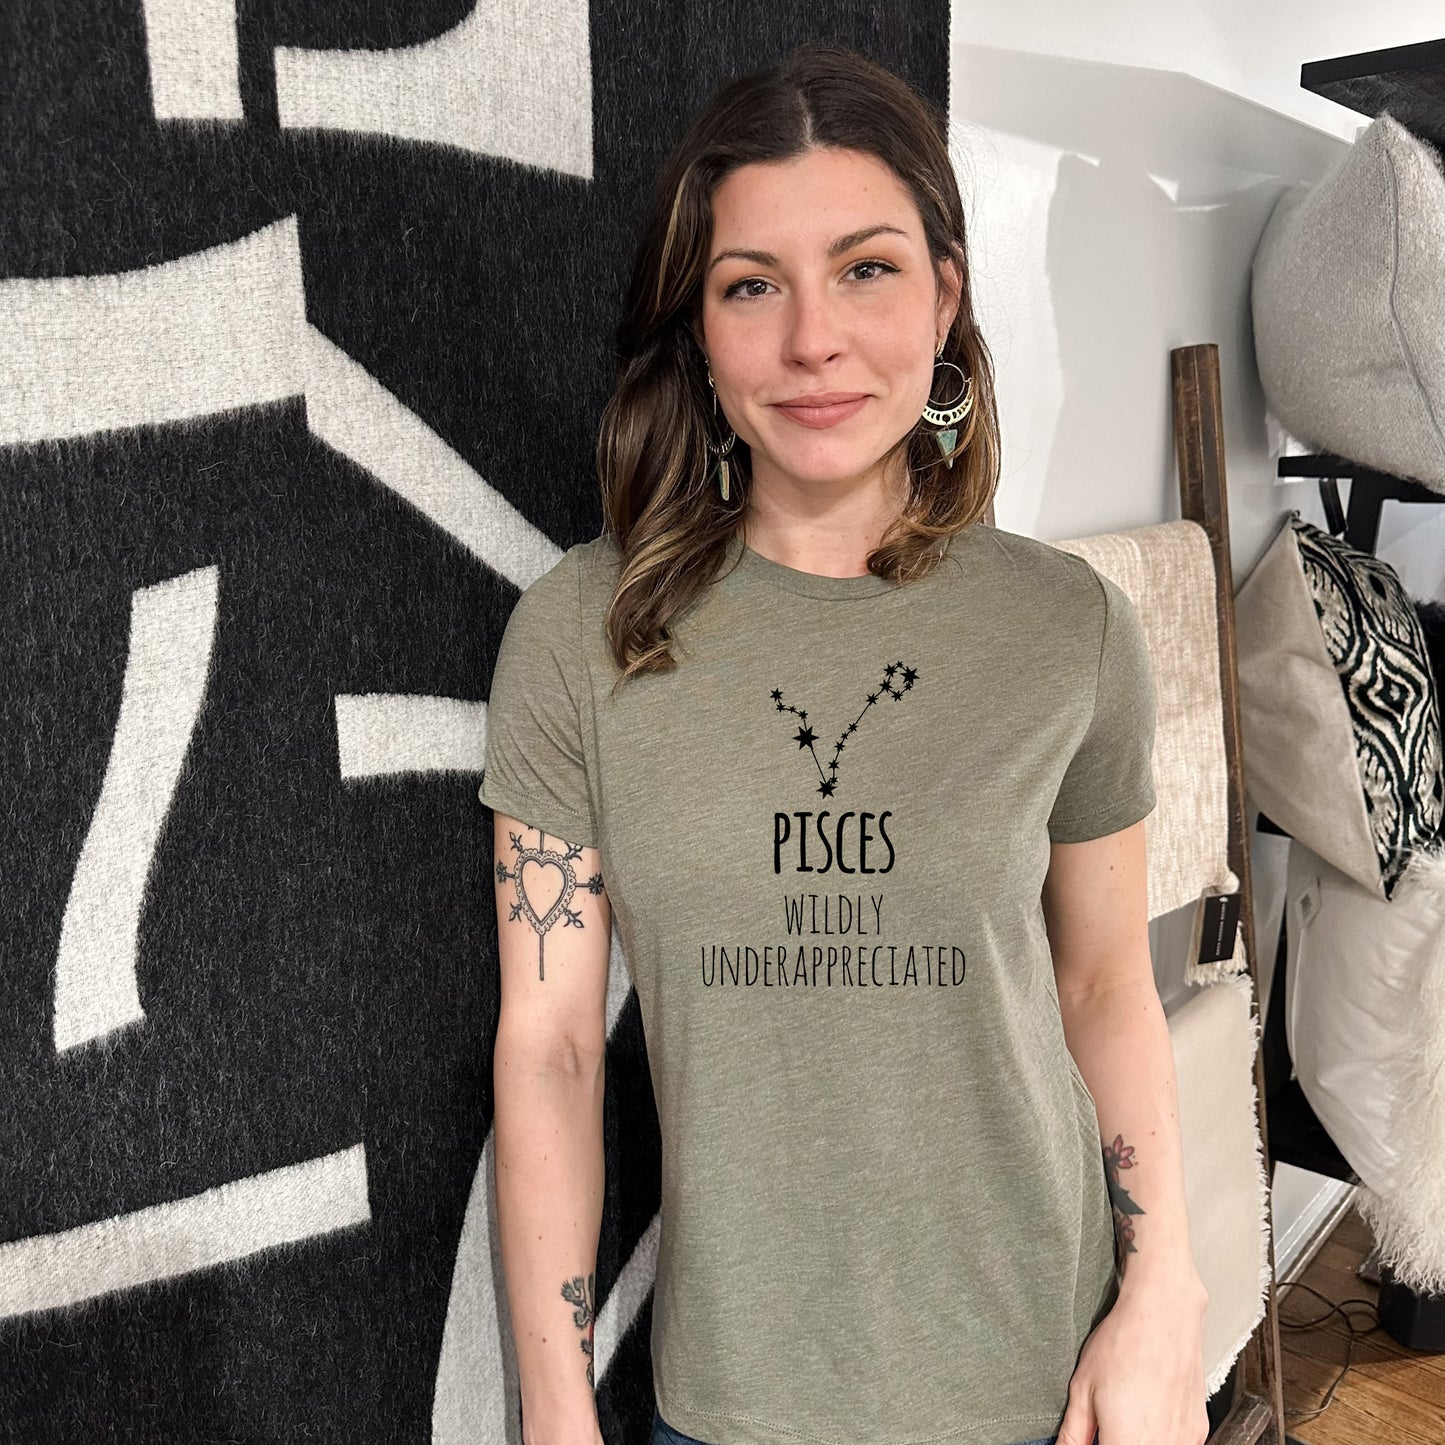 Pisces (Wildly Underappreciated) - Women's Crew Tee - Olive or Dusty Blue